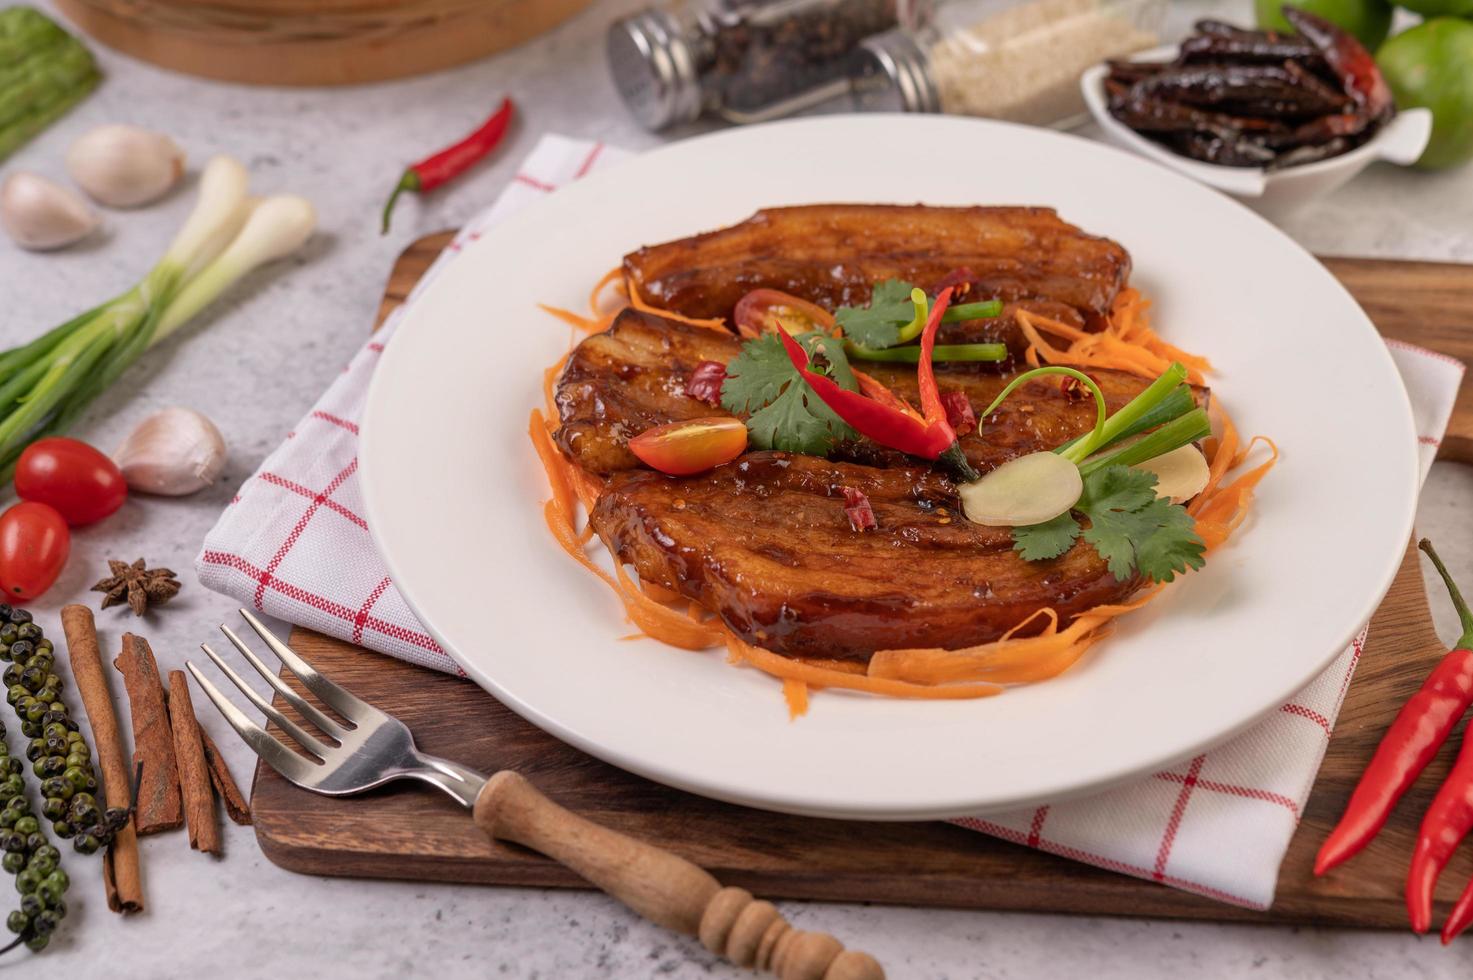 Sweet pork with chili, spring onions, carrots and coriander photo